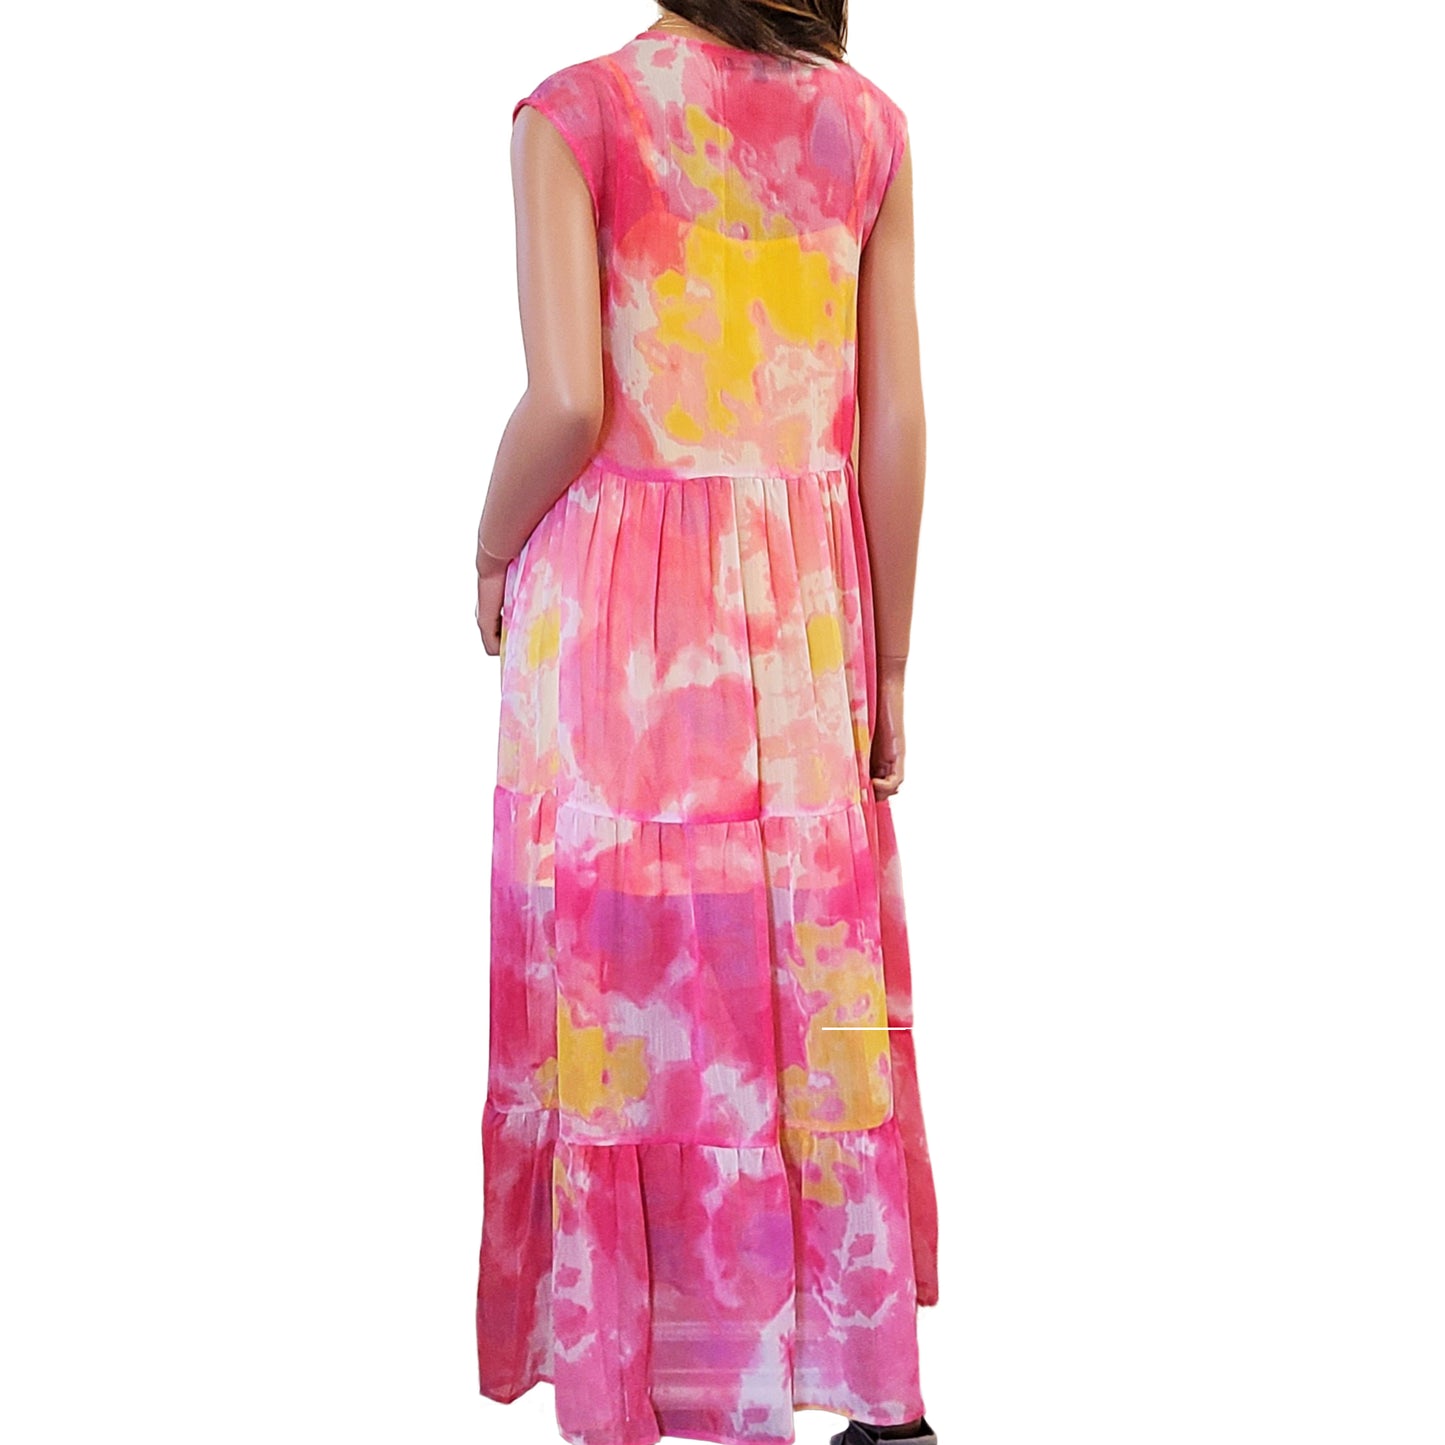 AMERICA & BEYOND Tie Dye Lined Tiered Cover-up Maxi Dress